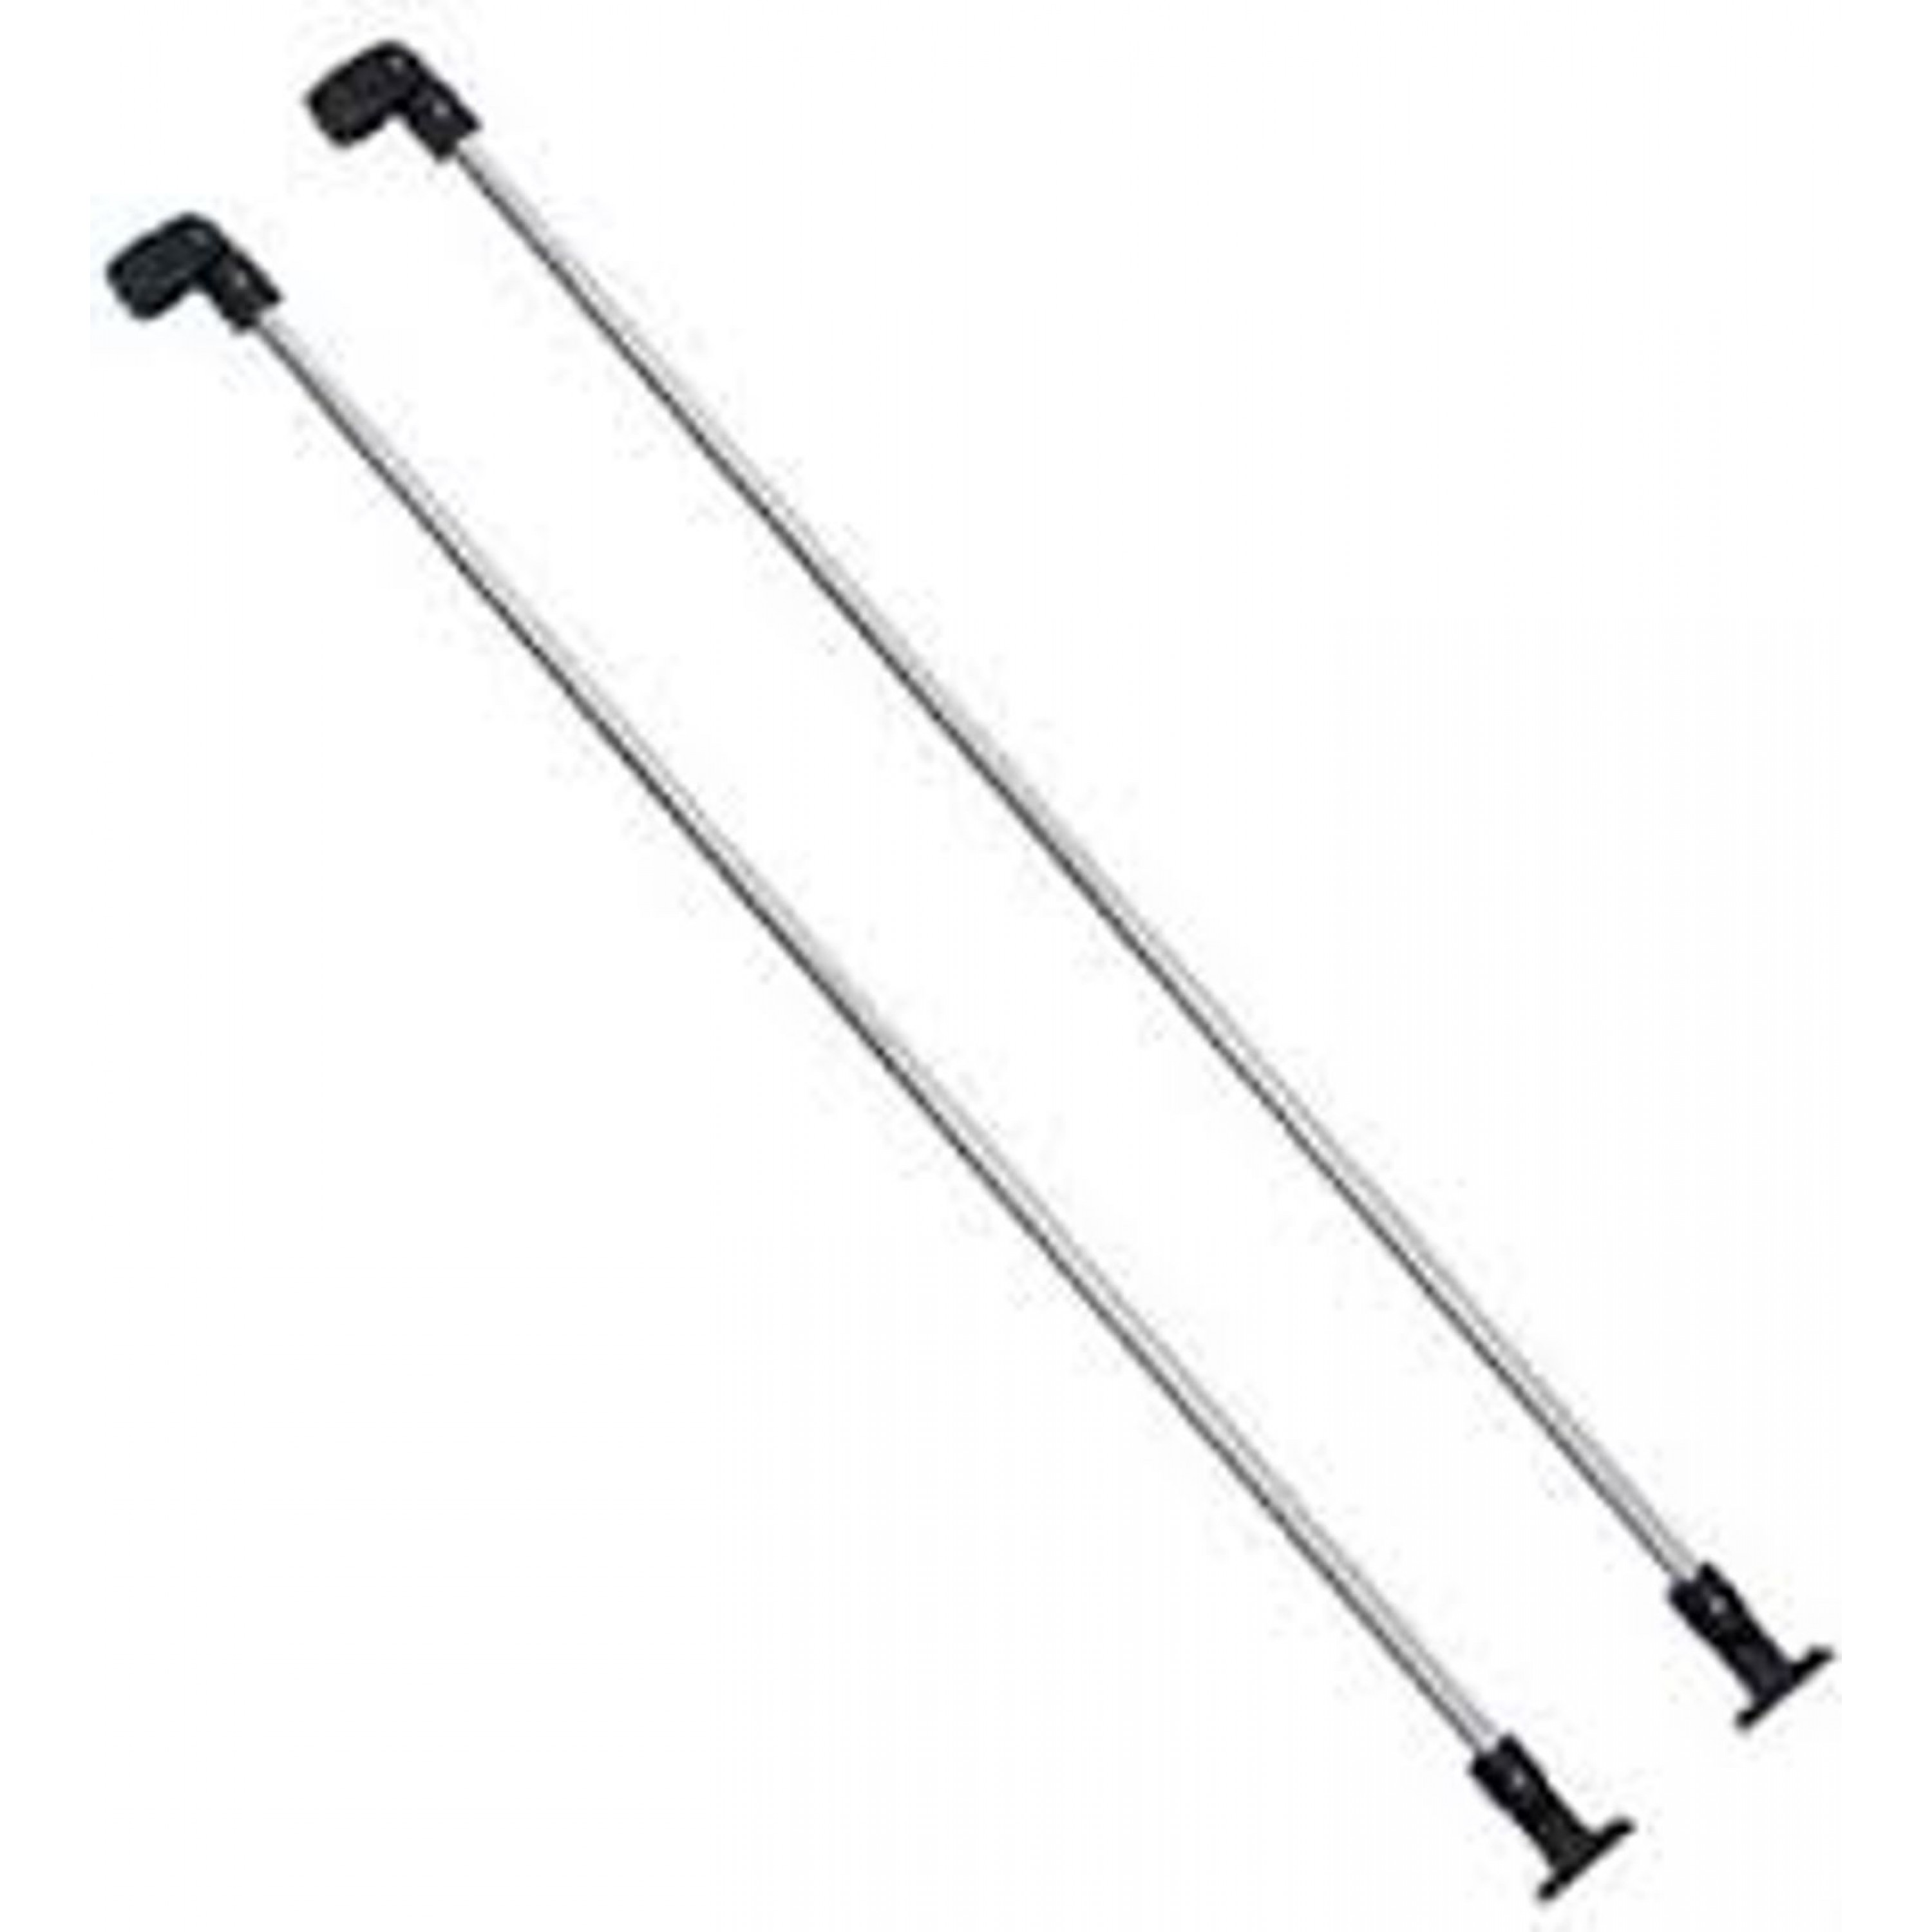 FIXED LENGTH BIMINI TOP SUPPORT POLES TAYLOR MADE